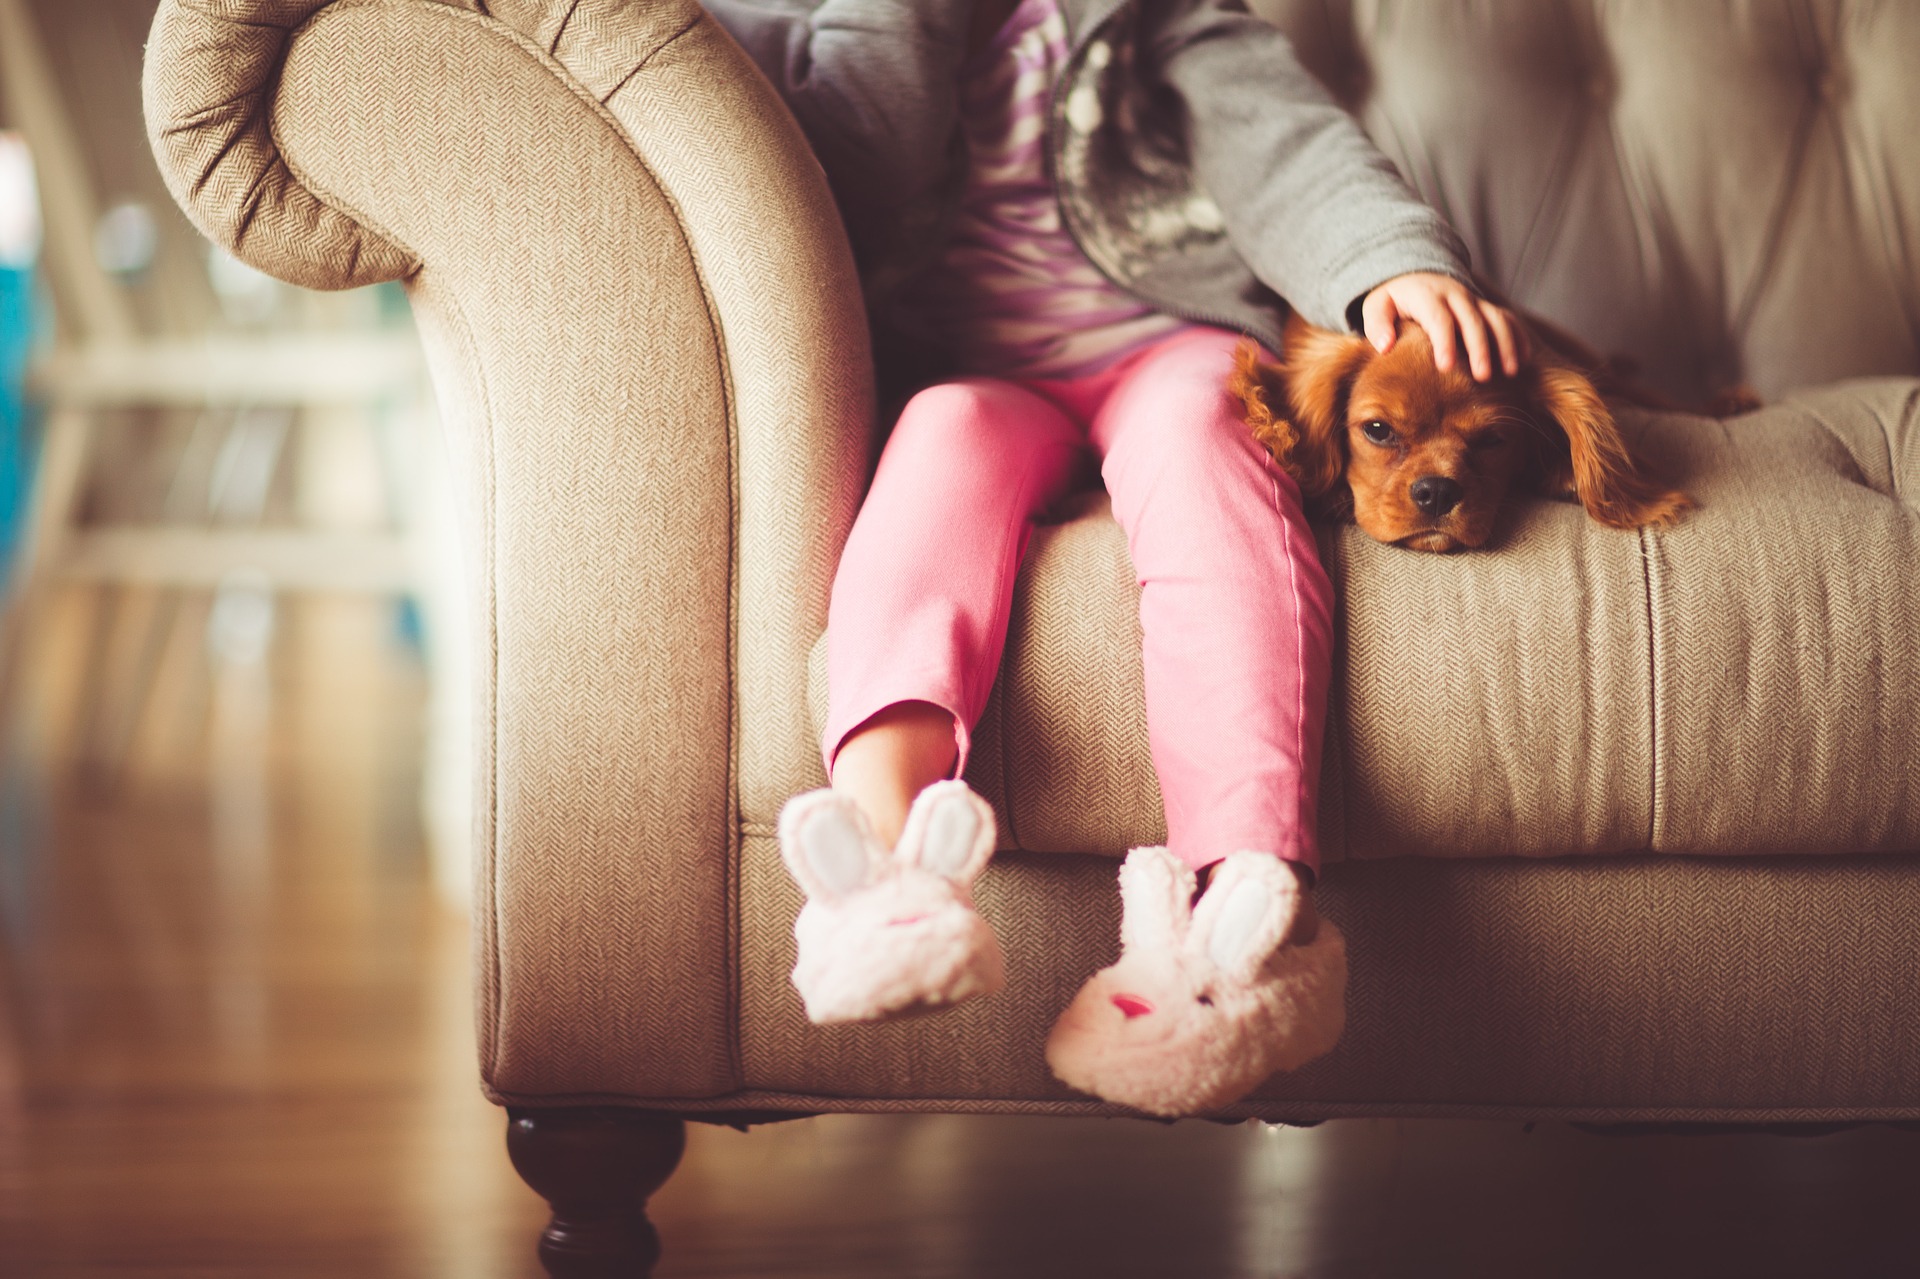 Dog sitting on couch with a small female child wearing pink pants and bunny slippers. Her hand rests on top of the brown dog's head.